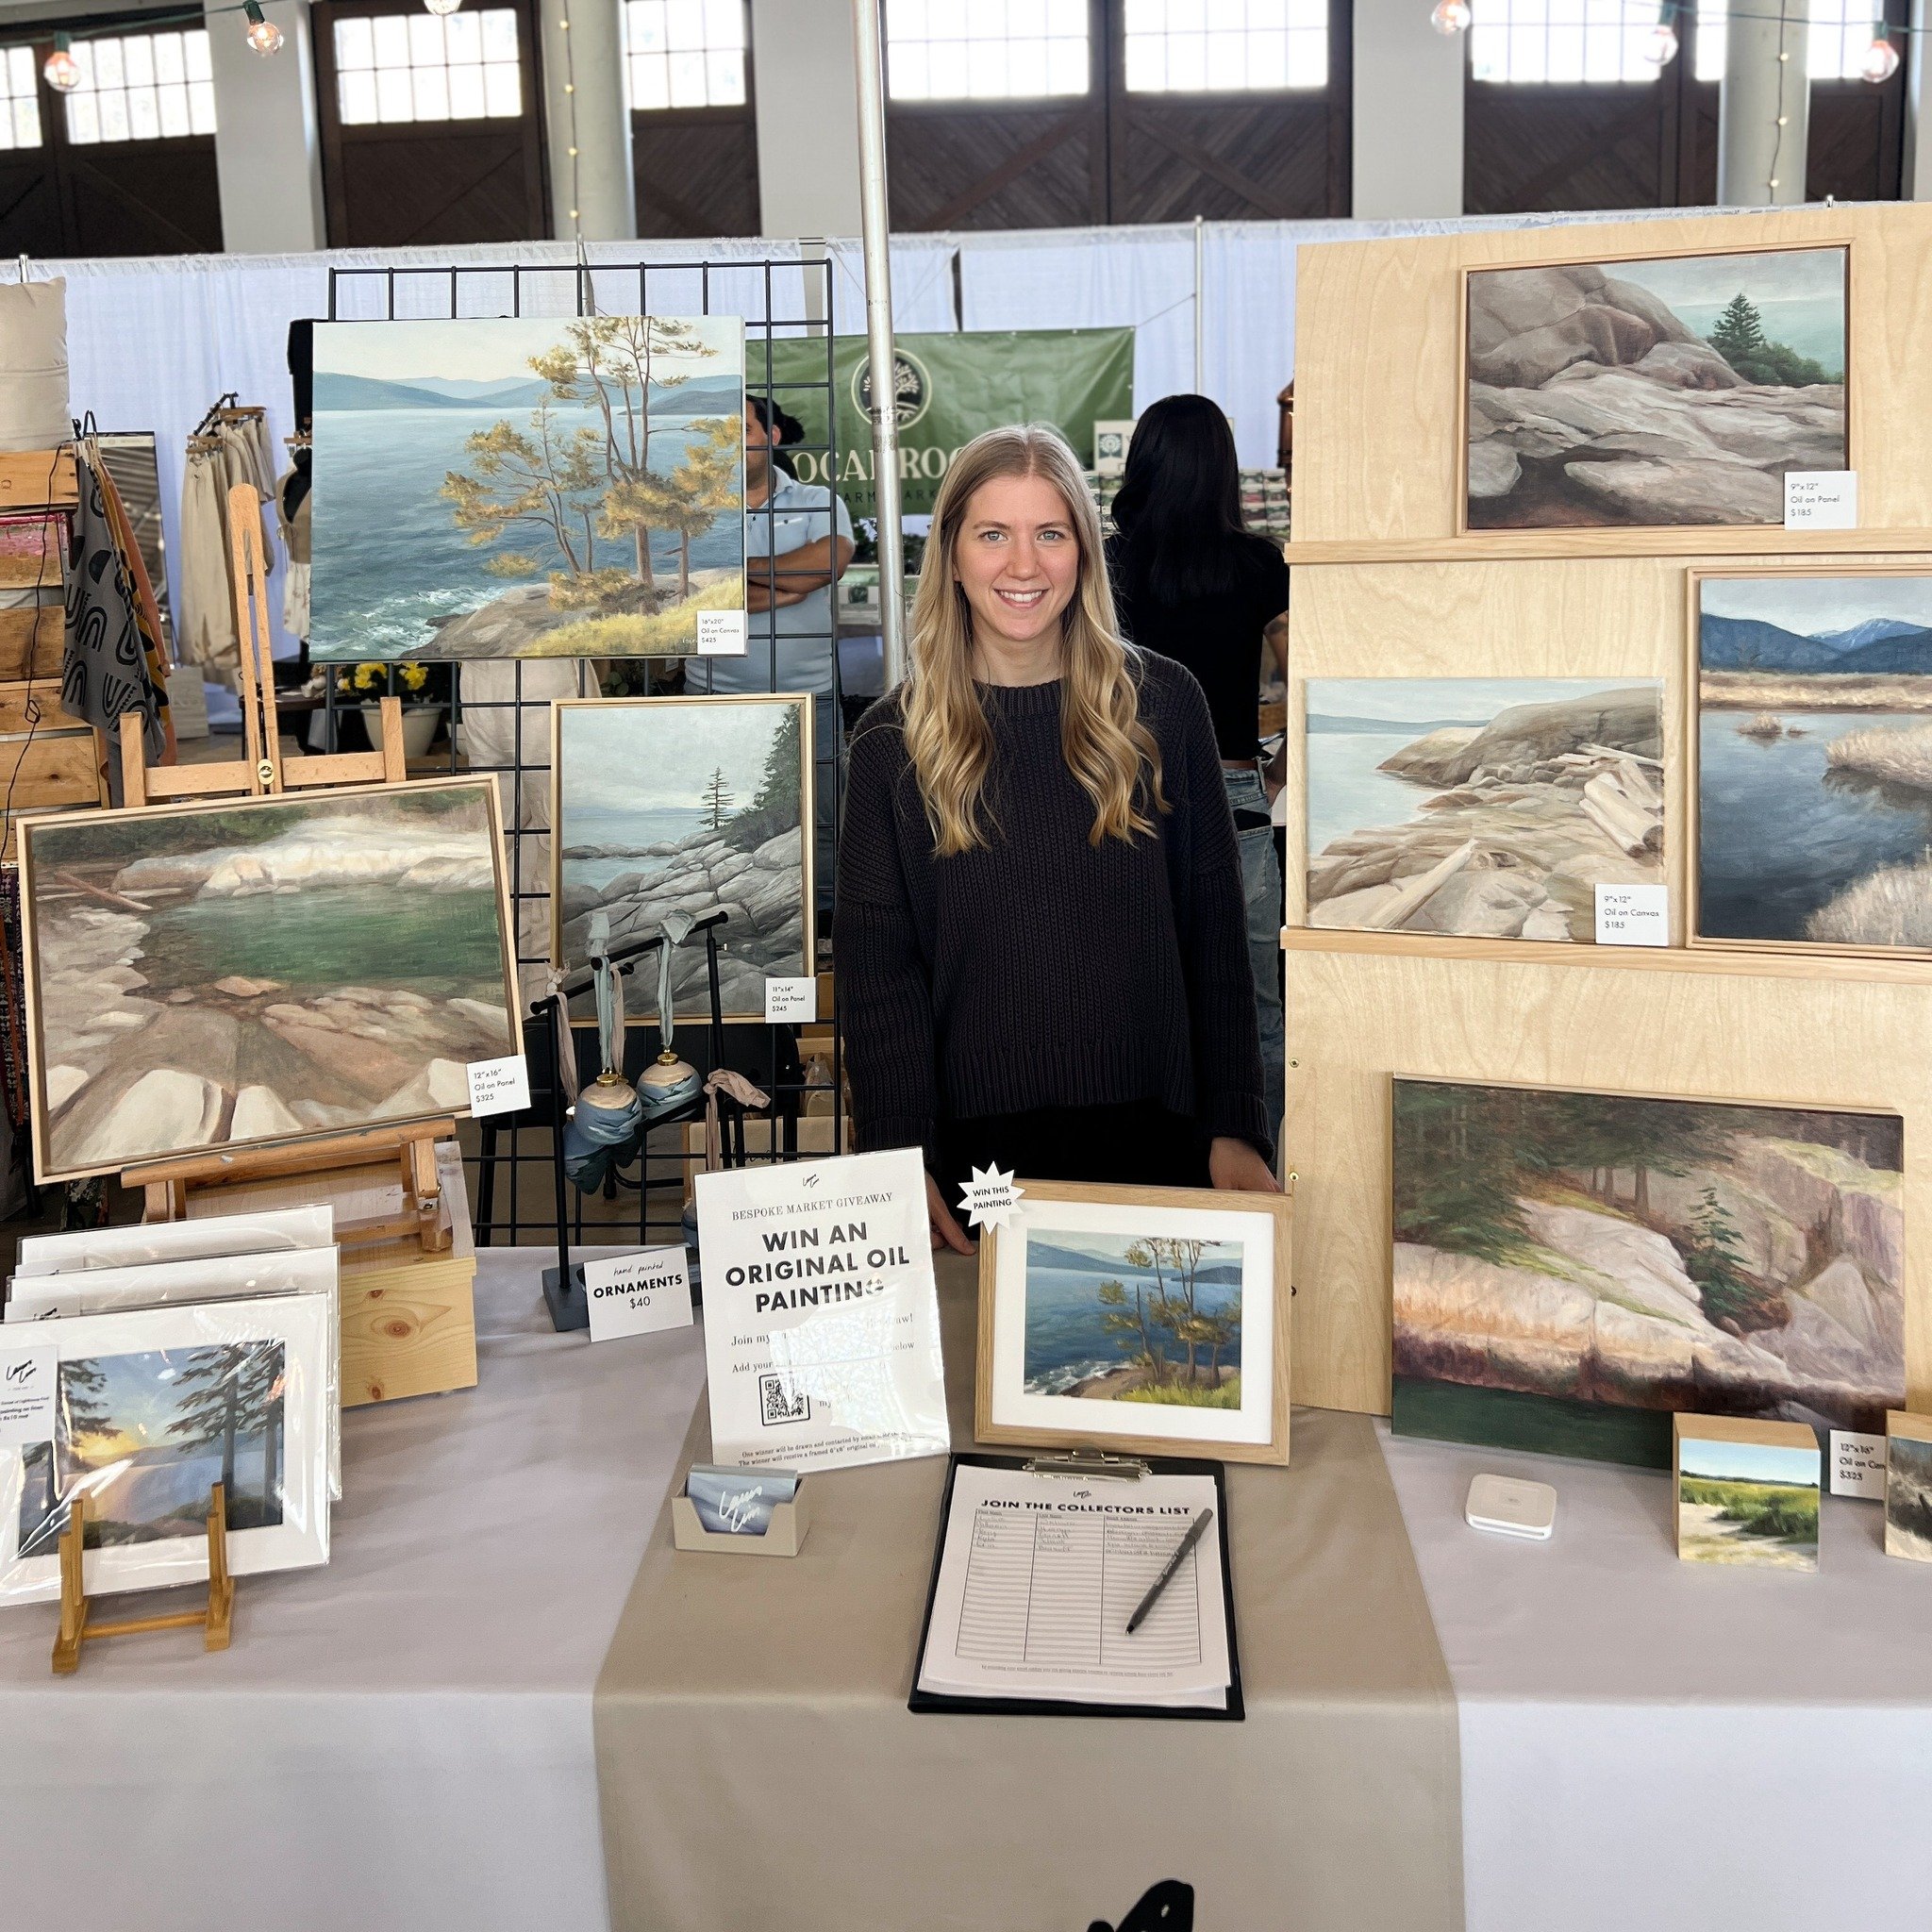 I&rsquo;m back home after a lovely weekend of sharing my art in Squamish ☺️ thank you so much to everyone who stopped by my booth to buy a painting, sign up for my email list, chat about art or just share a word of encouragement, you made this weeken